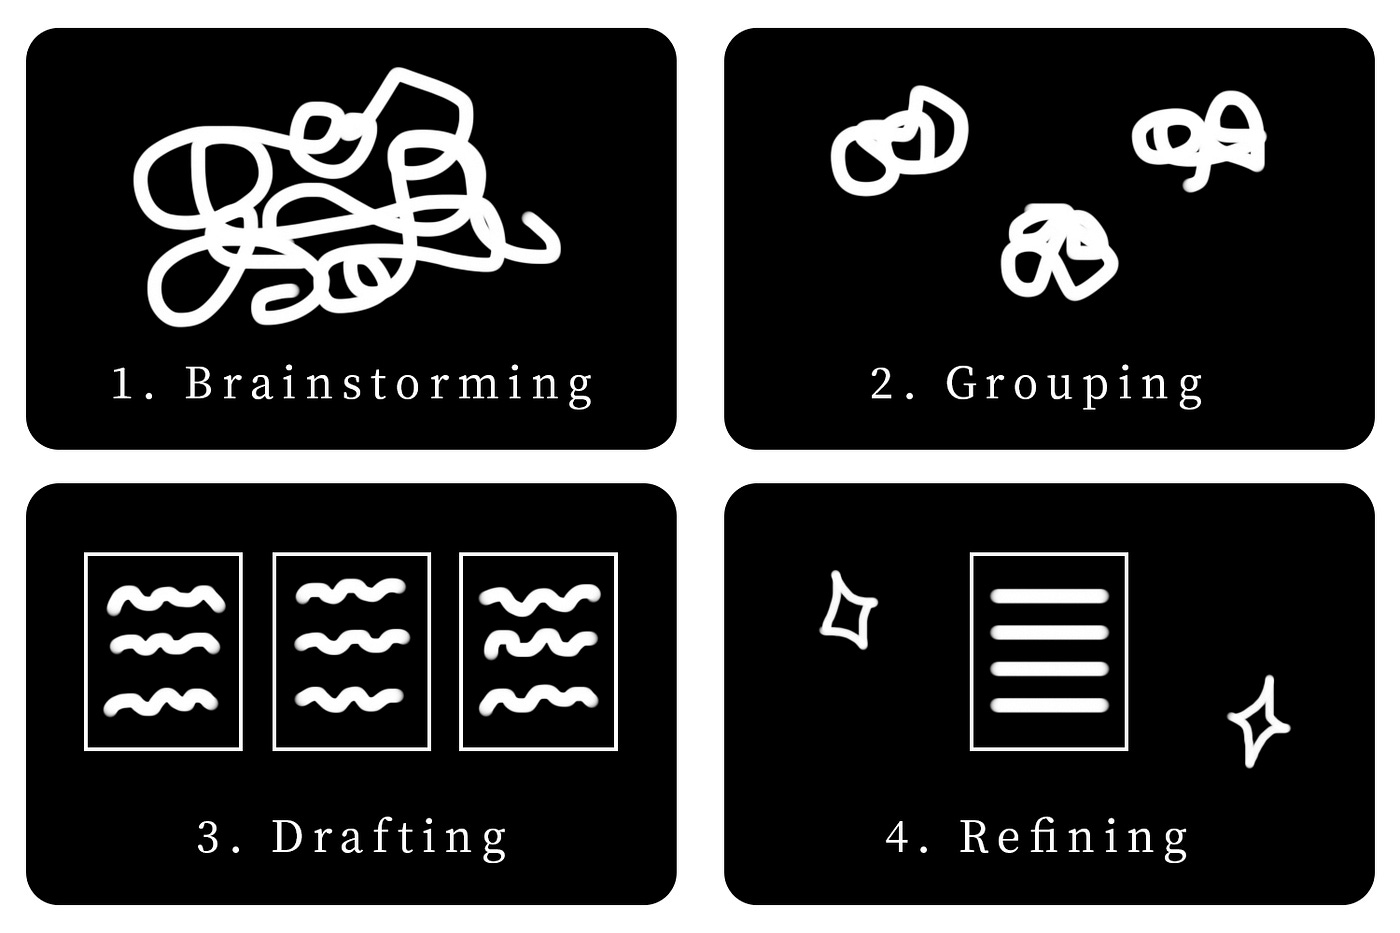 4 steps of the writing process include: Brainstorming, Grouping, Drafting, and Refining.